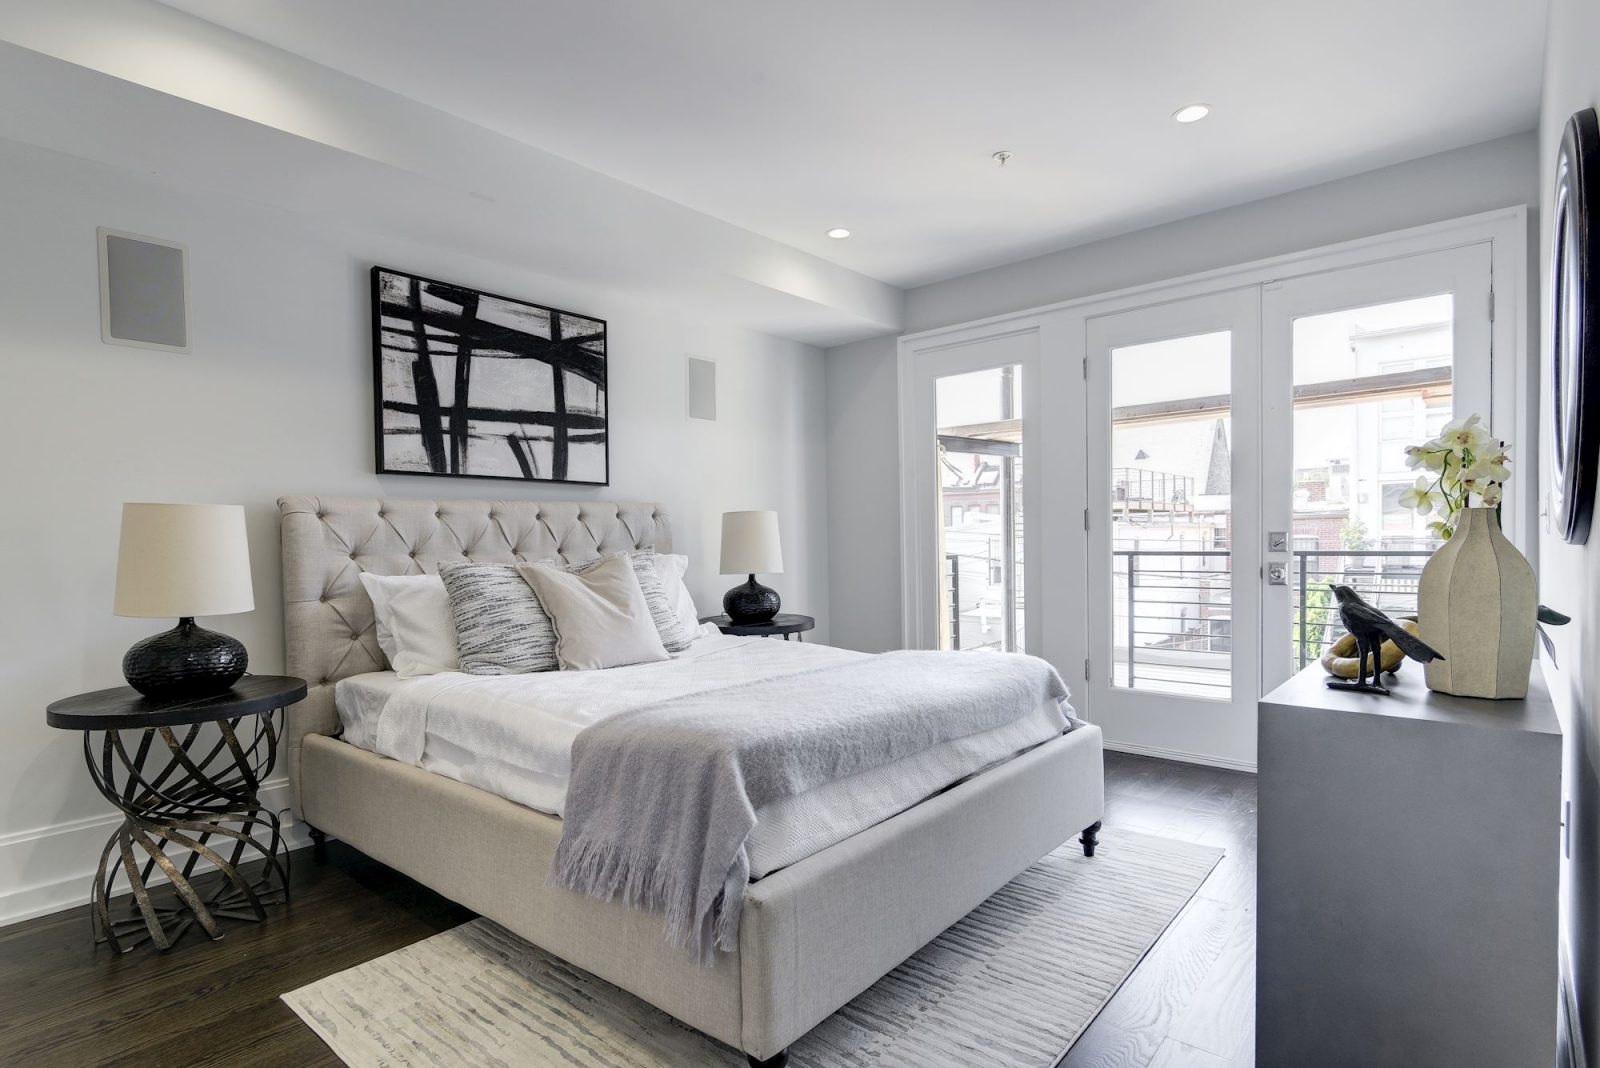 The Basics of Staging Your Master Bedroom